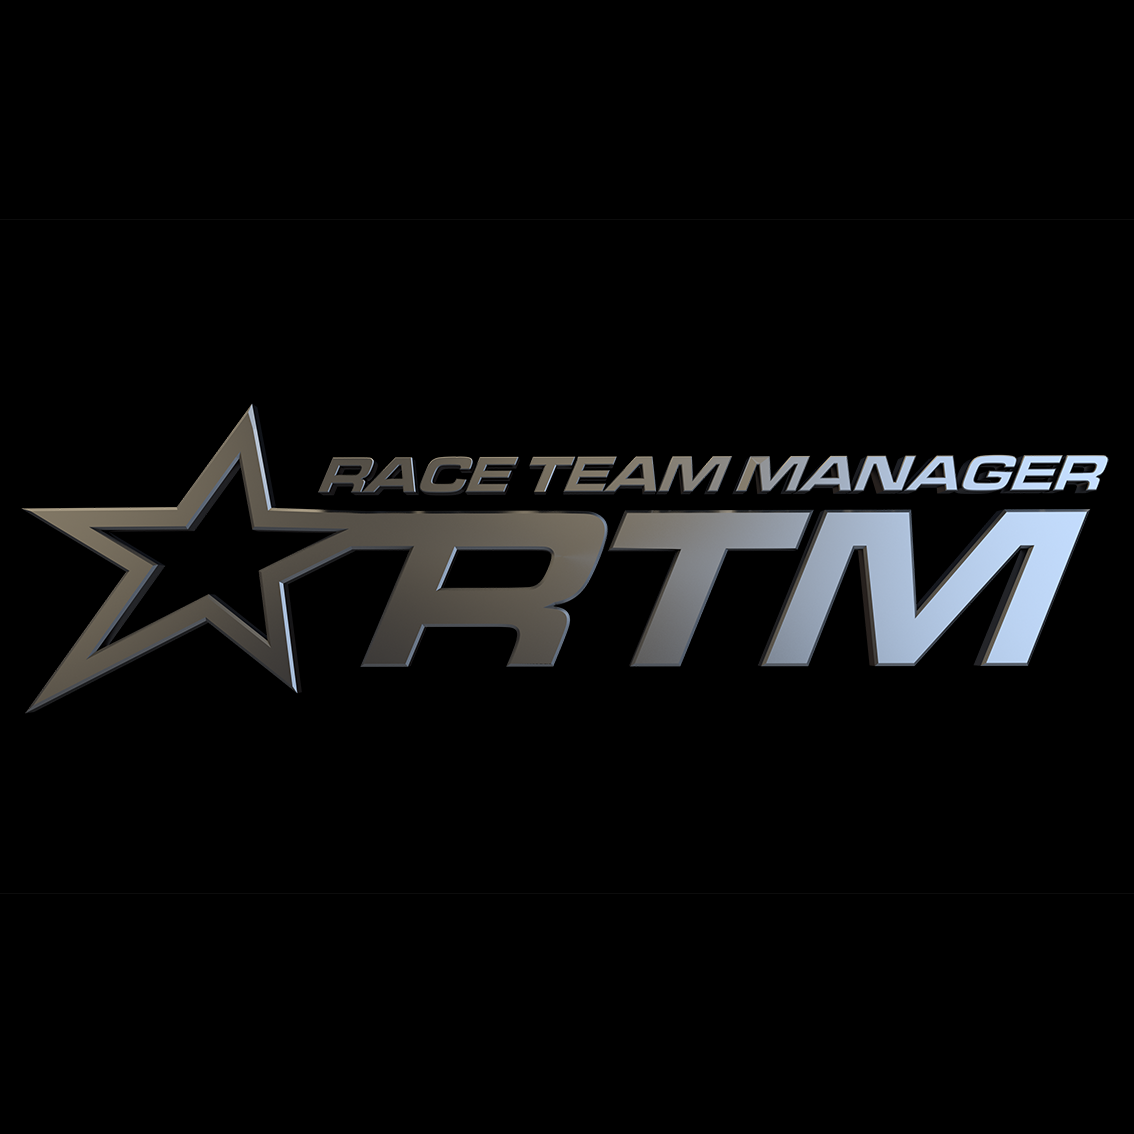 Race Team Manager On Twitter Live The Life Of Race Boss Hire Your Team Buy Cars Unlock Challenges To Take Your Team To The Top Rtmgame Http T Co Tejuokrx77 - racer manager roblox at racermanager twitter